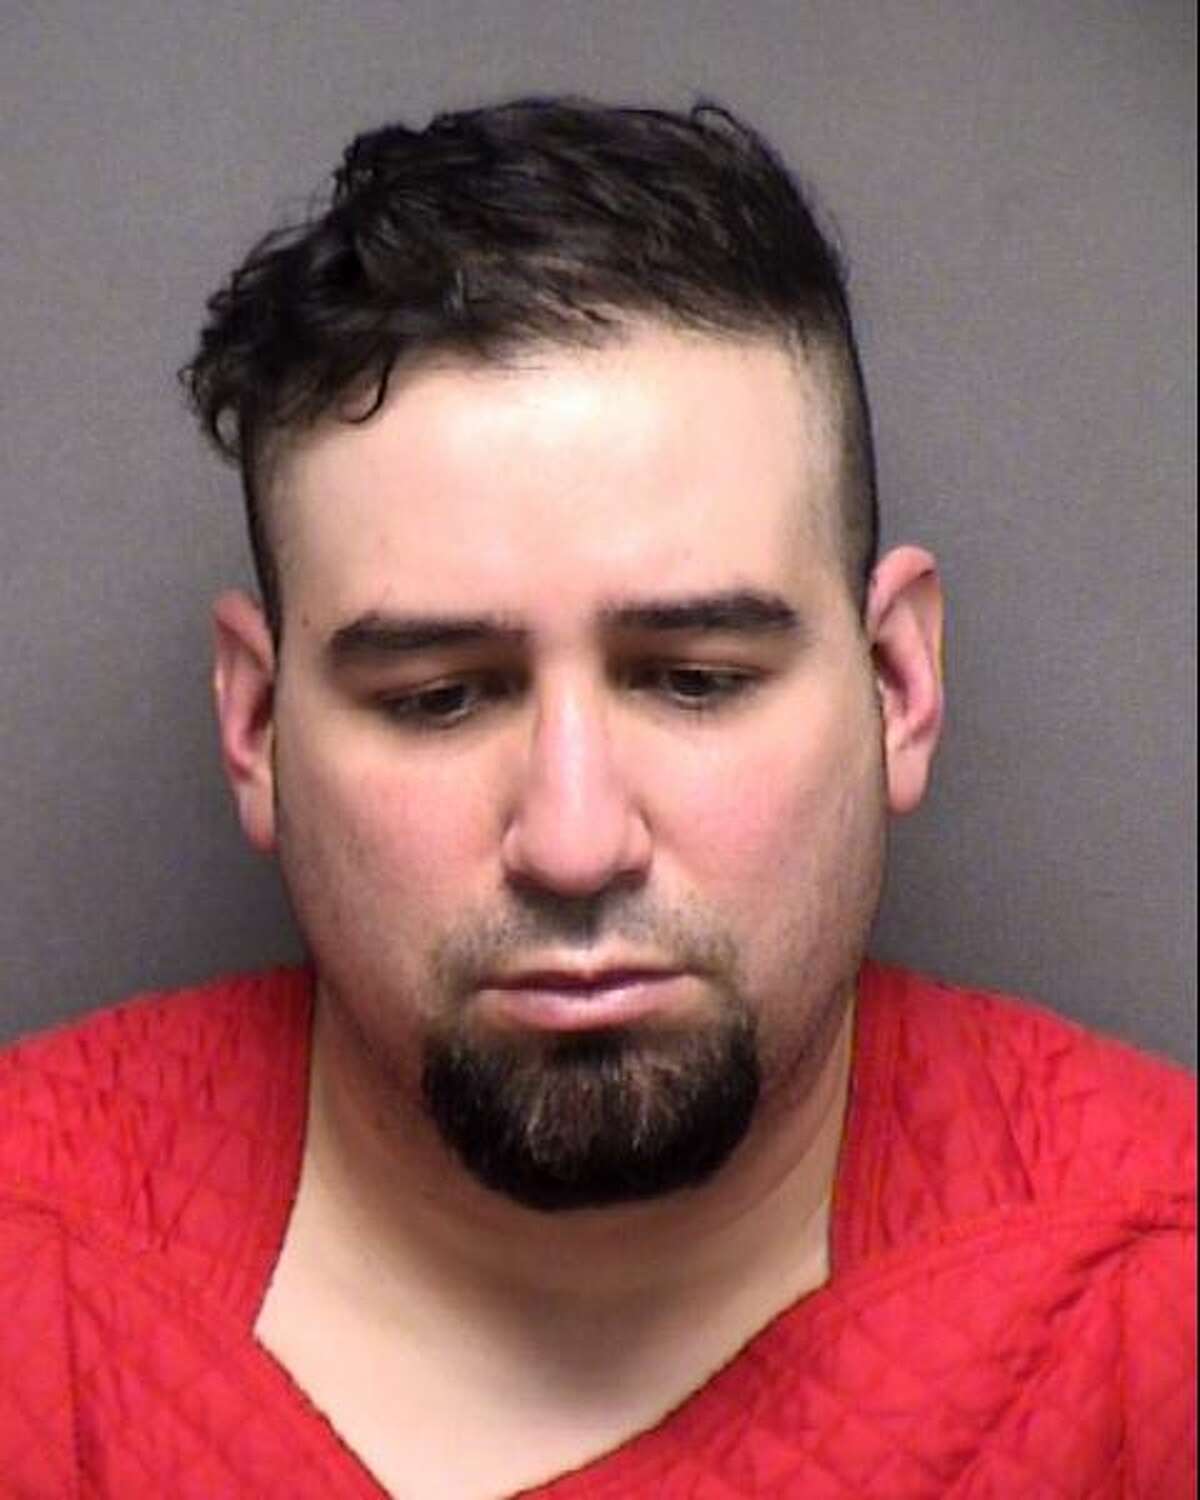 Jose Villarreal was sentenced to six years in prison after he pleaded guilty to two counts of possession of child pornography.